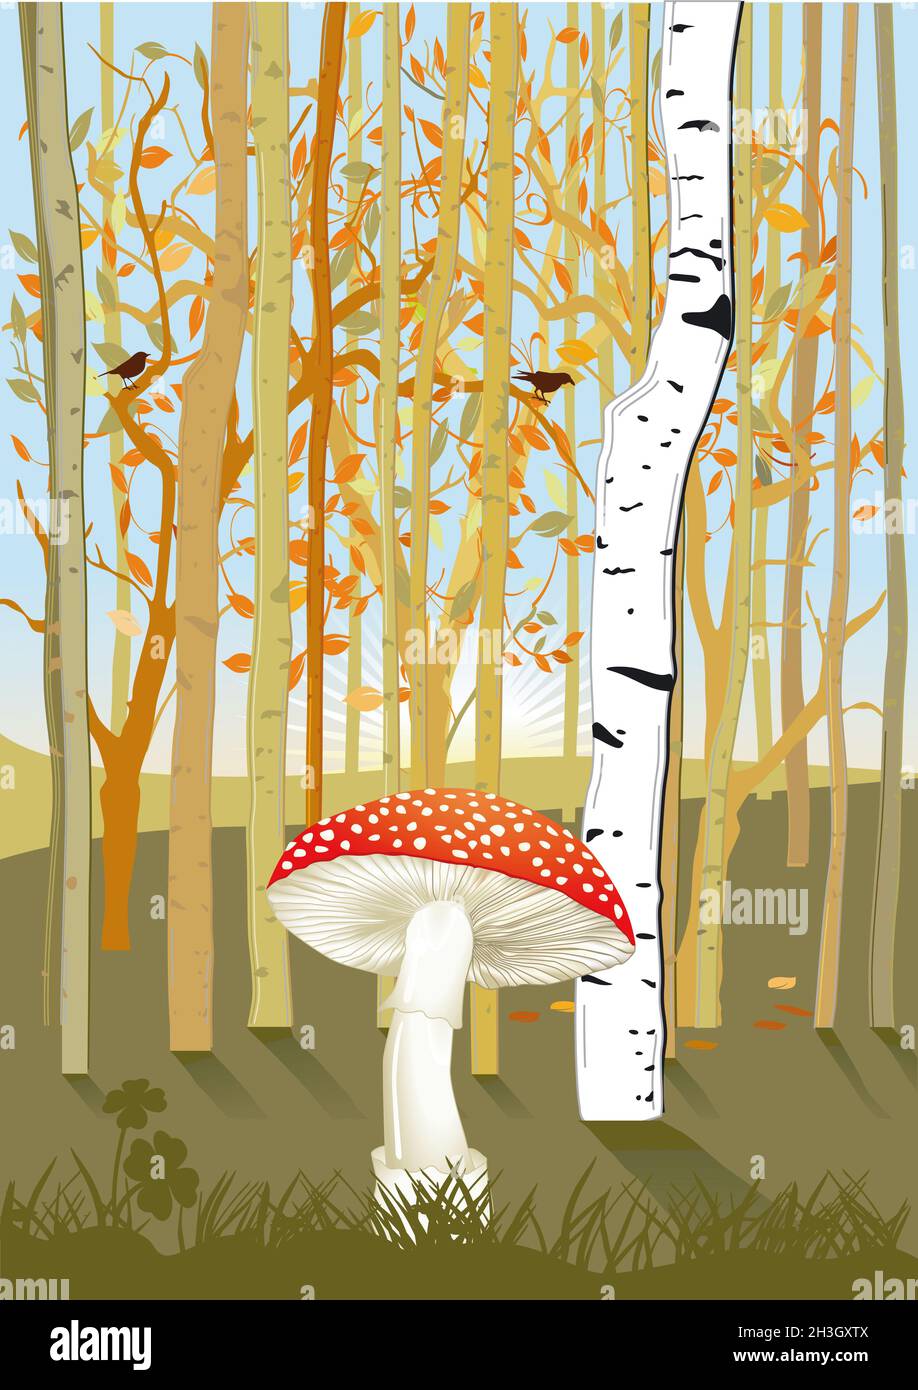 Forest with mushroom Stock Photo